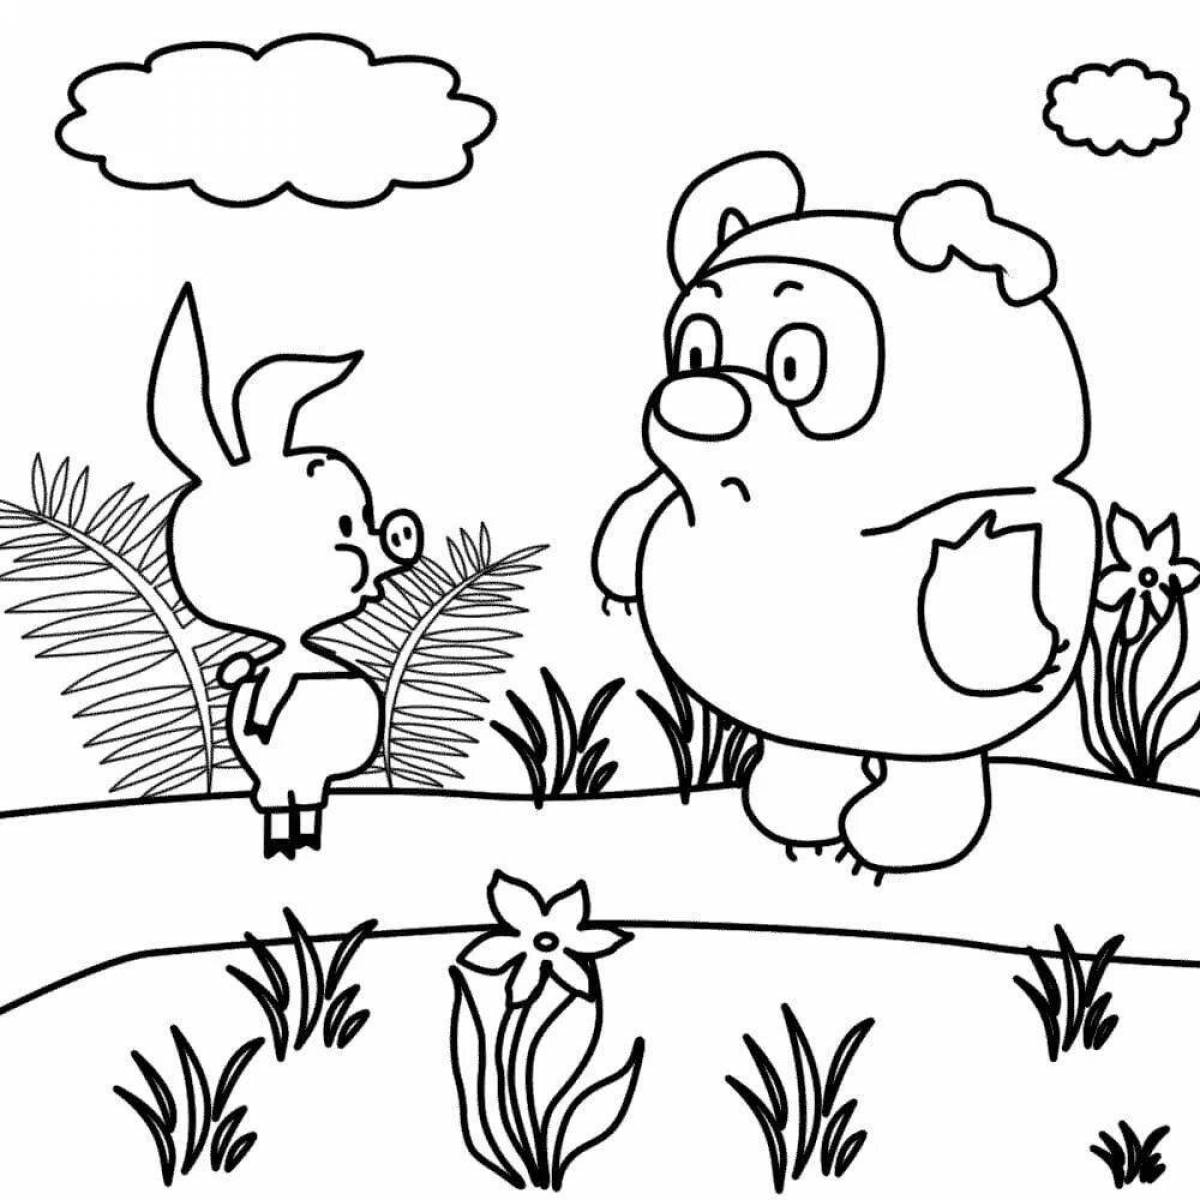 Coloring-journey we play coloring page